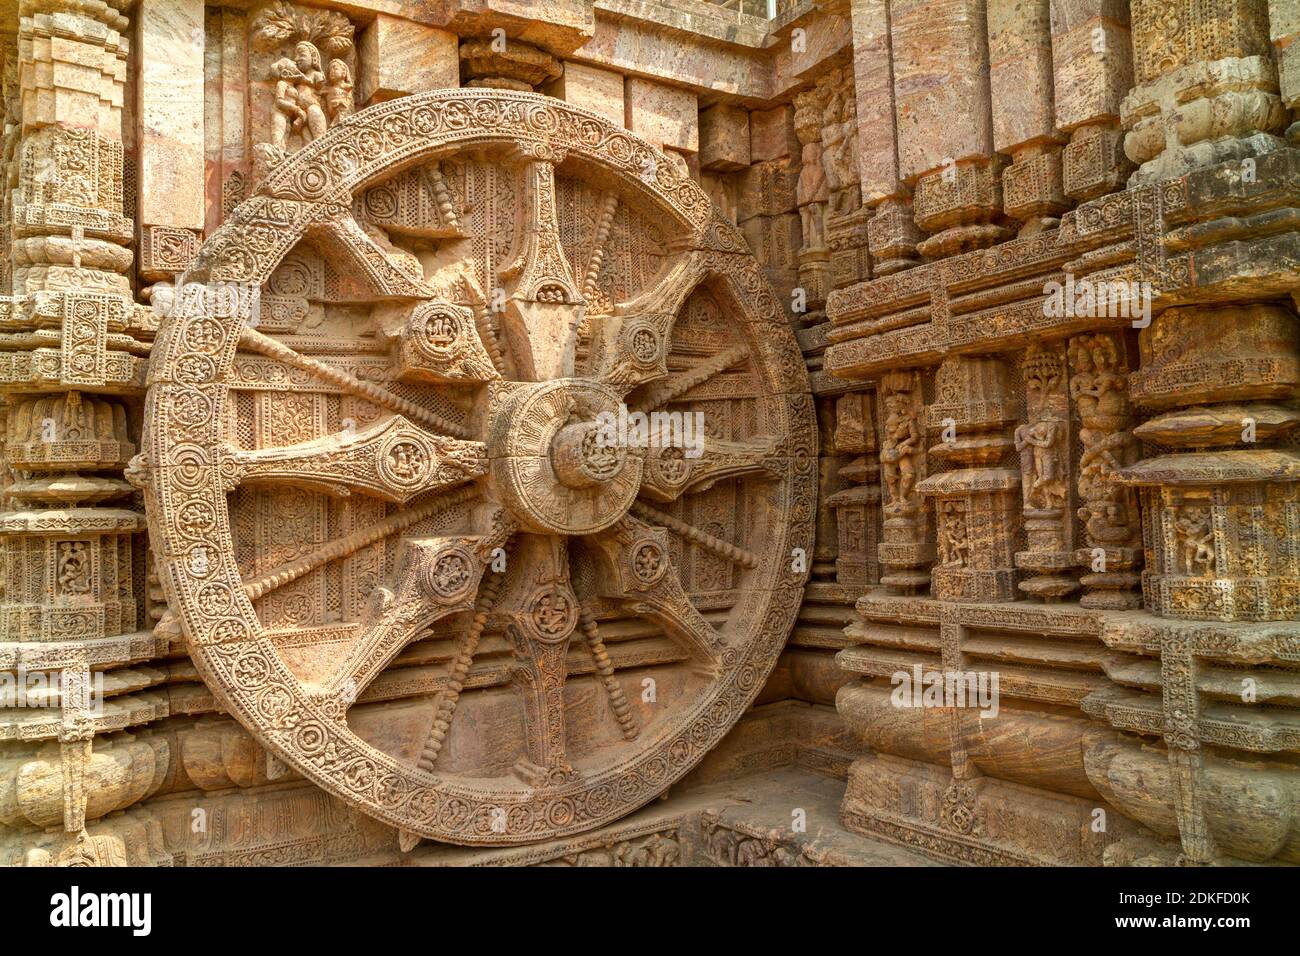 Close-up of chariot wheel intricate carvings in the ancient Hindu Sun Temple in Konark, Orissa, India. 13th-century CE. The temple is attributed to ki Stock Photo